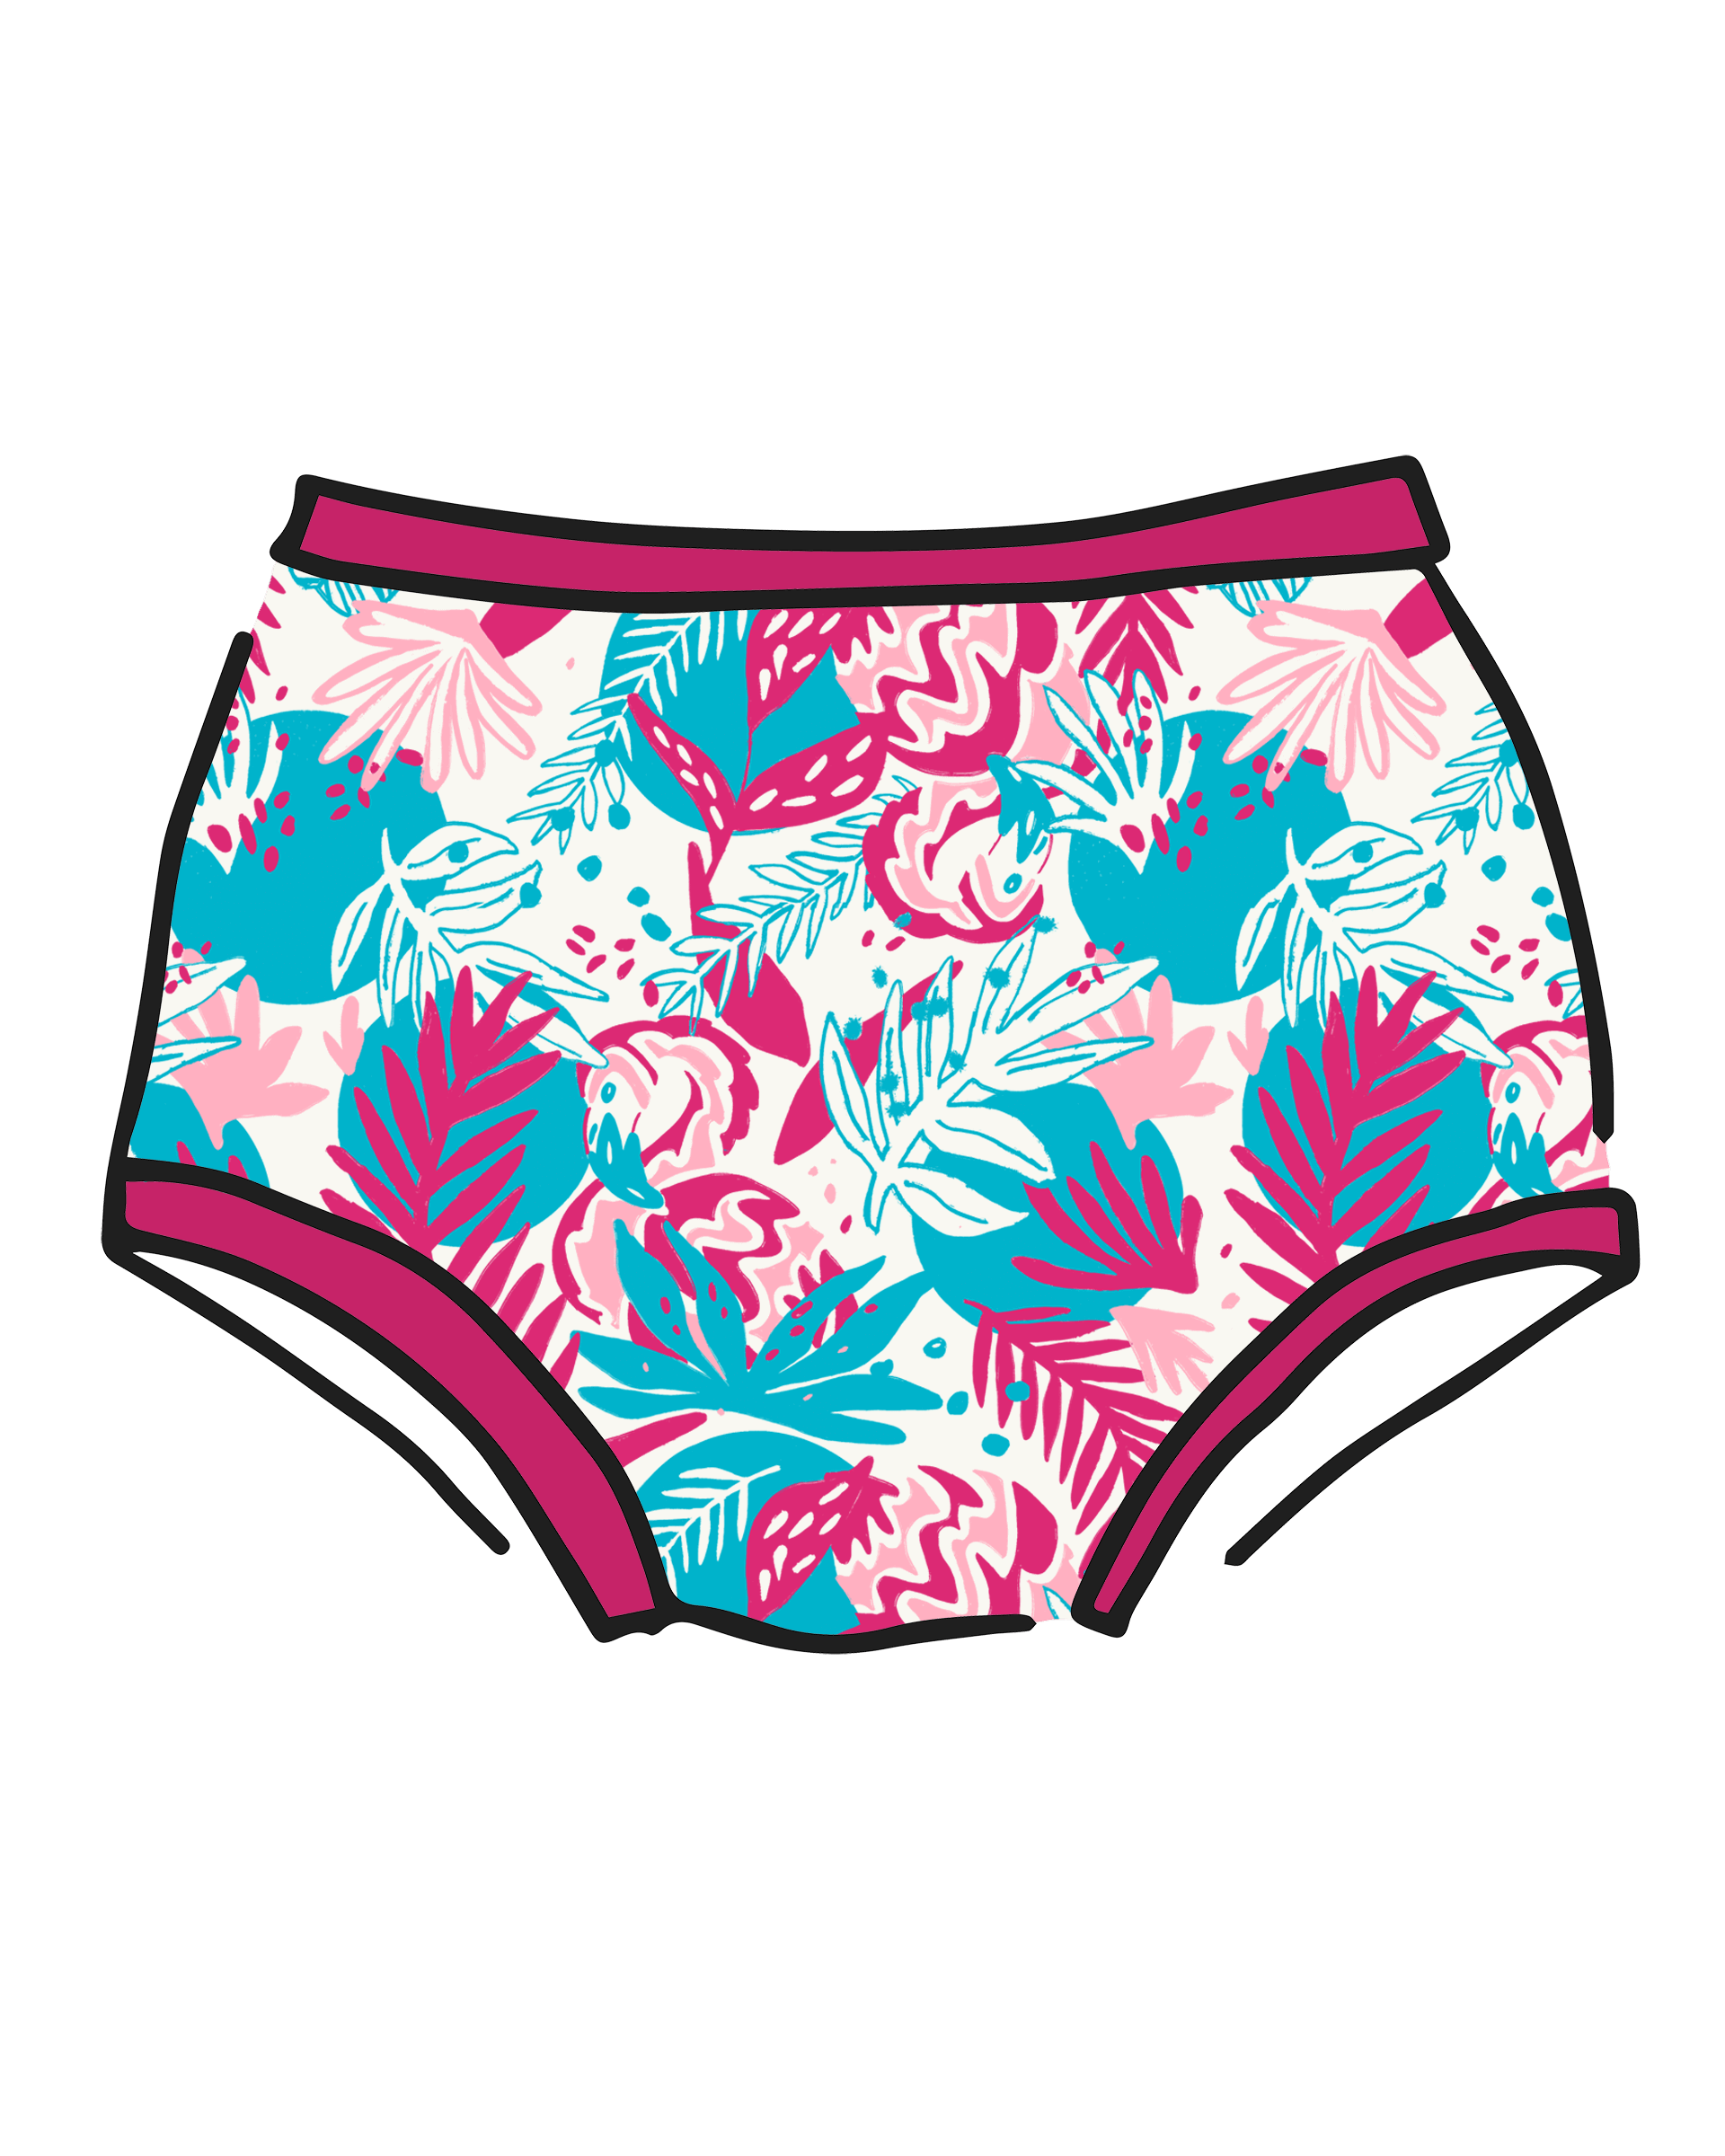 Drawing of Thunderpants Original style underwear in Finding Flamingo.